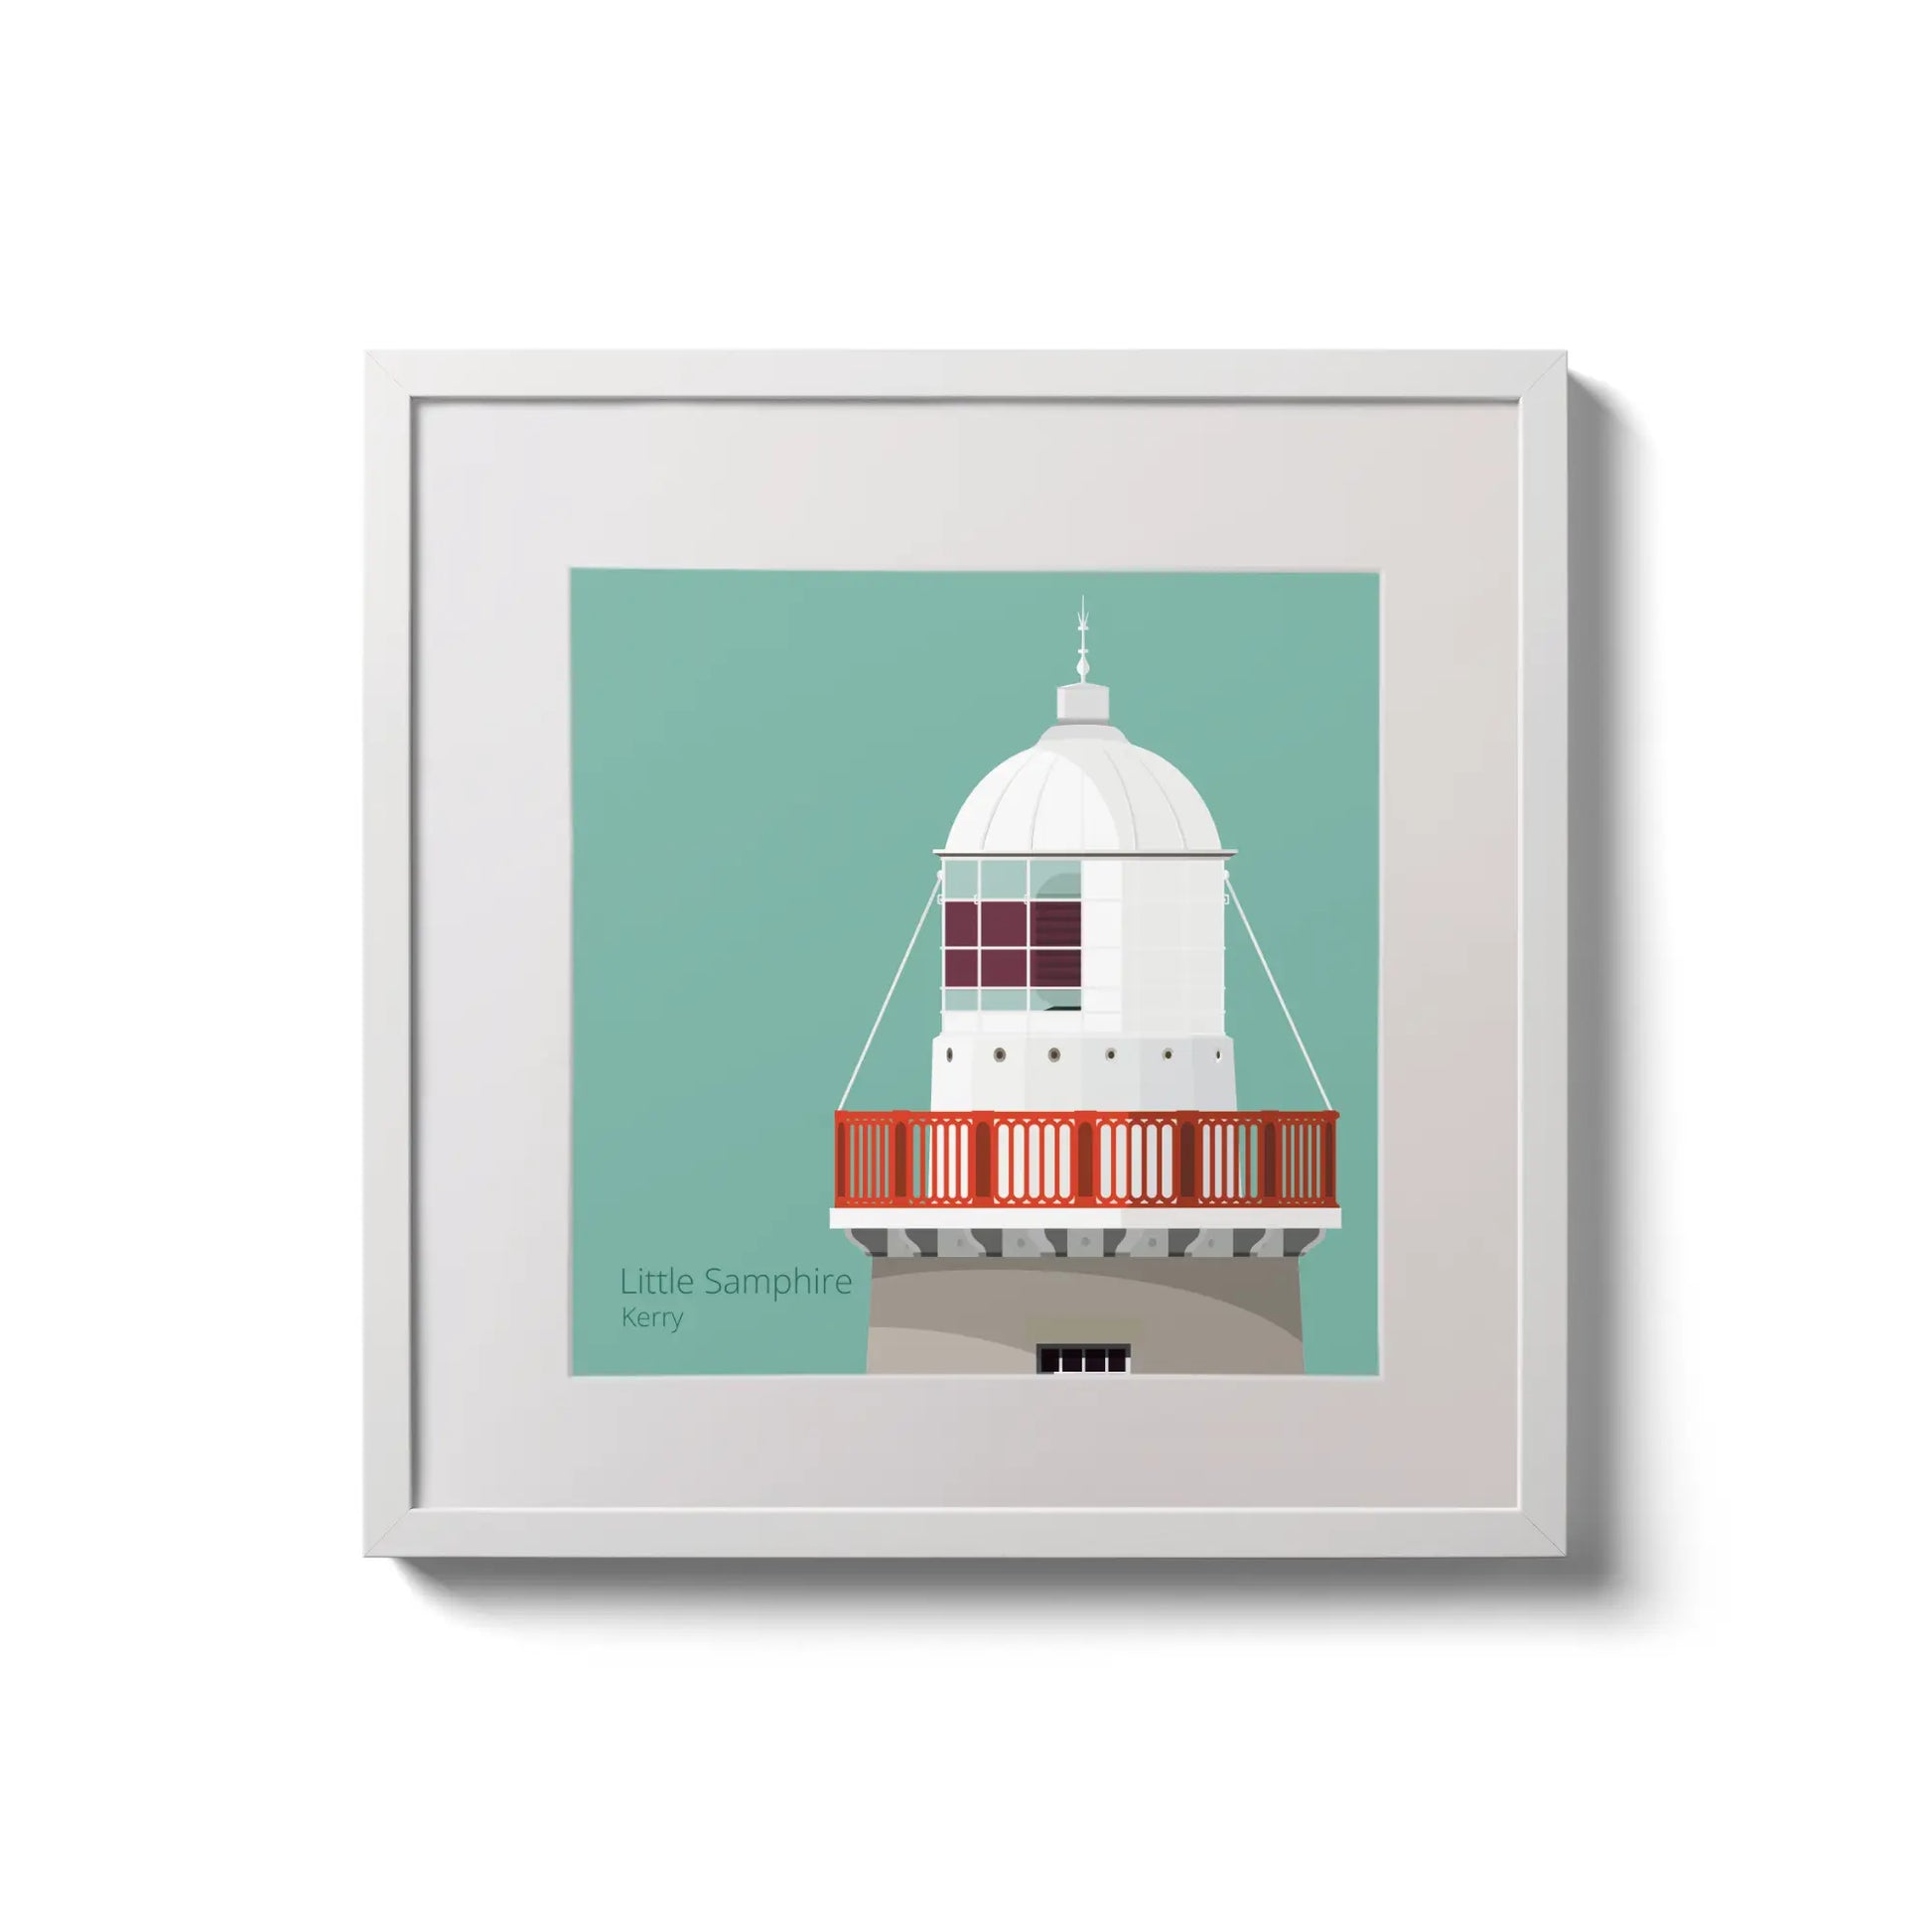 Contemporary wall hanging Little Samphire lighthouse on an ocean green background,  in a white square frame measuring 20x20cm.